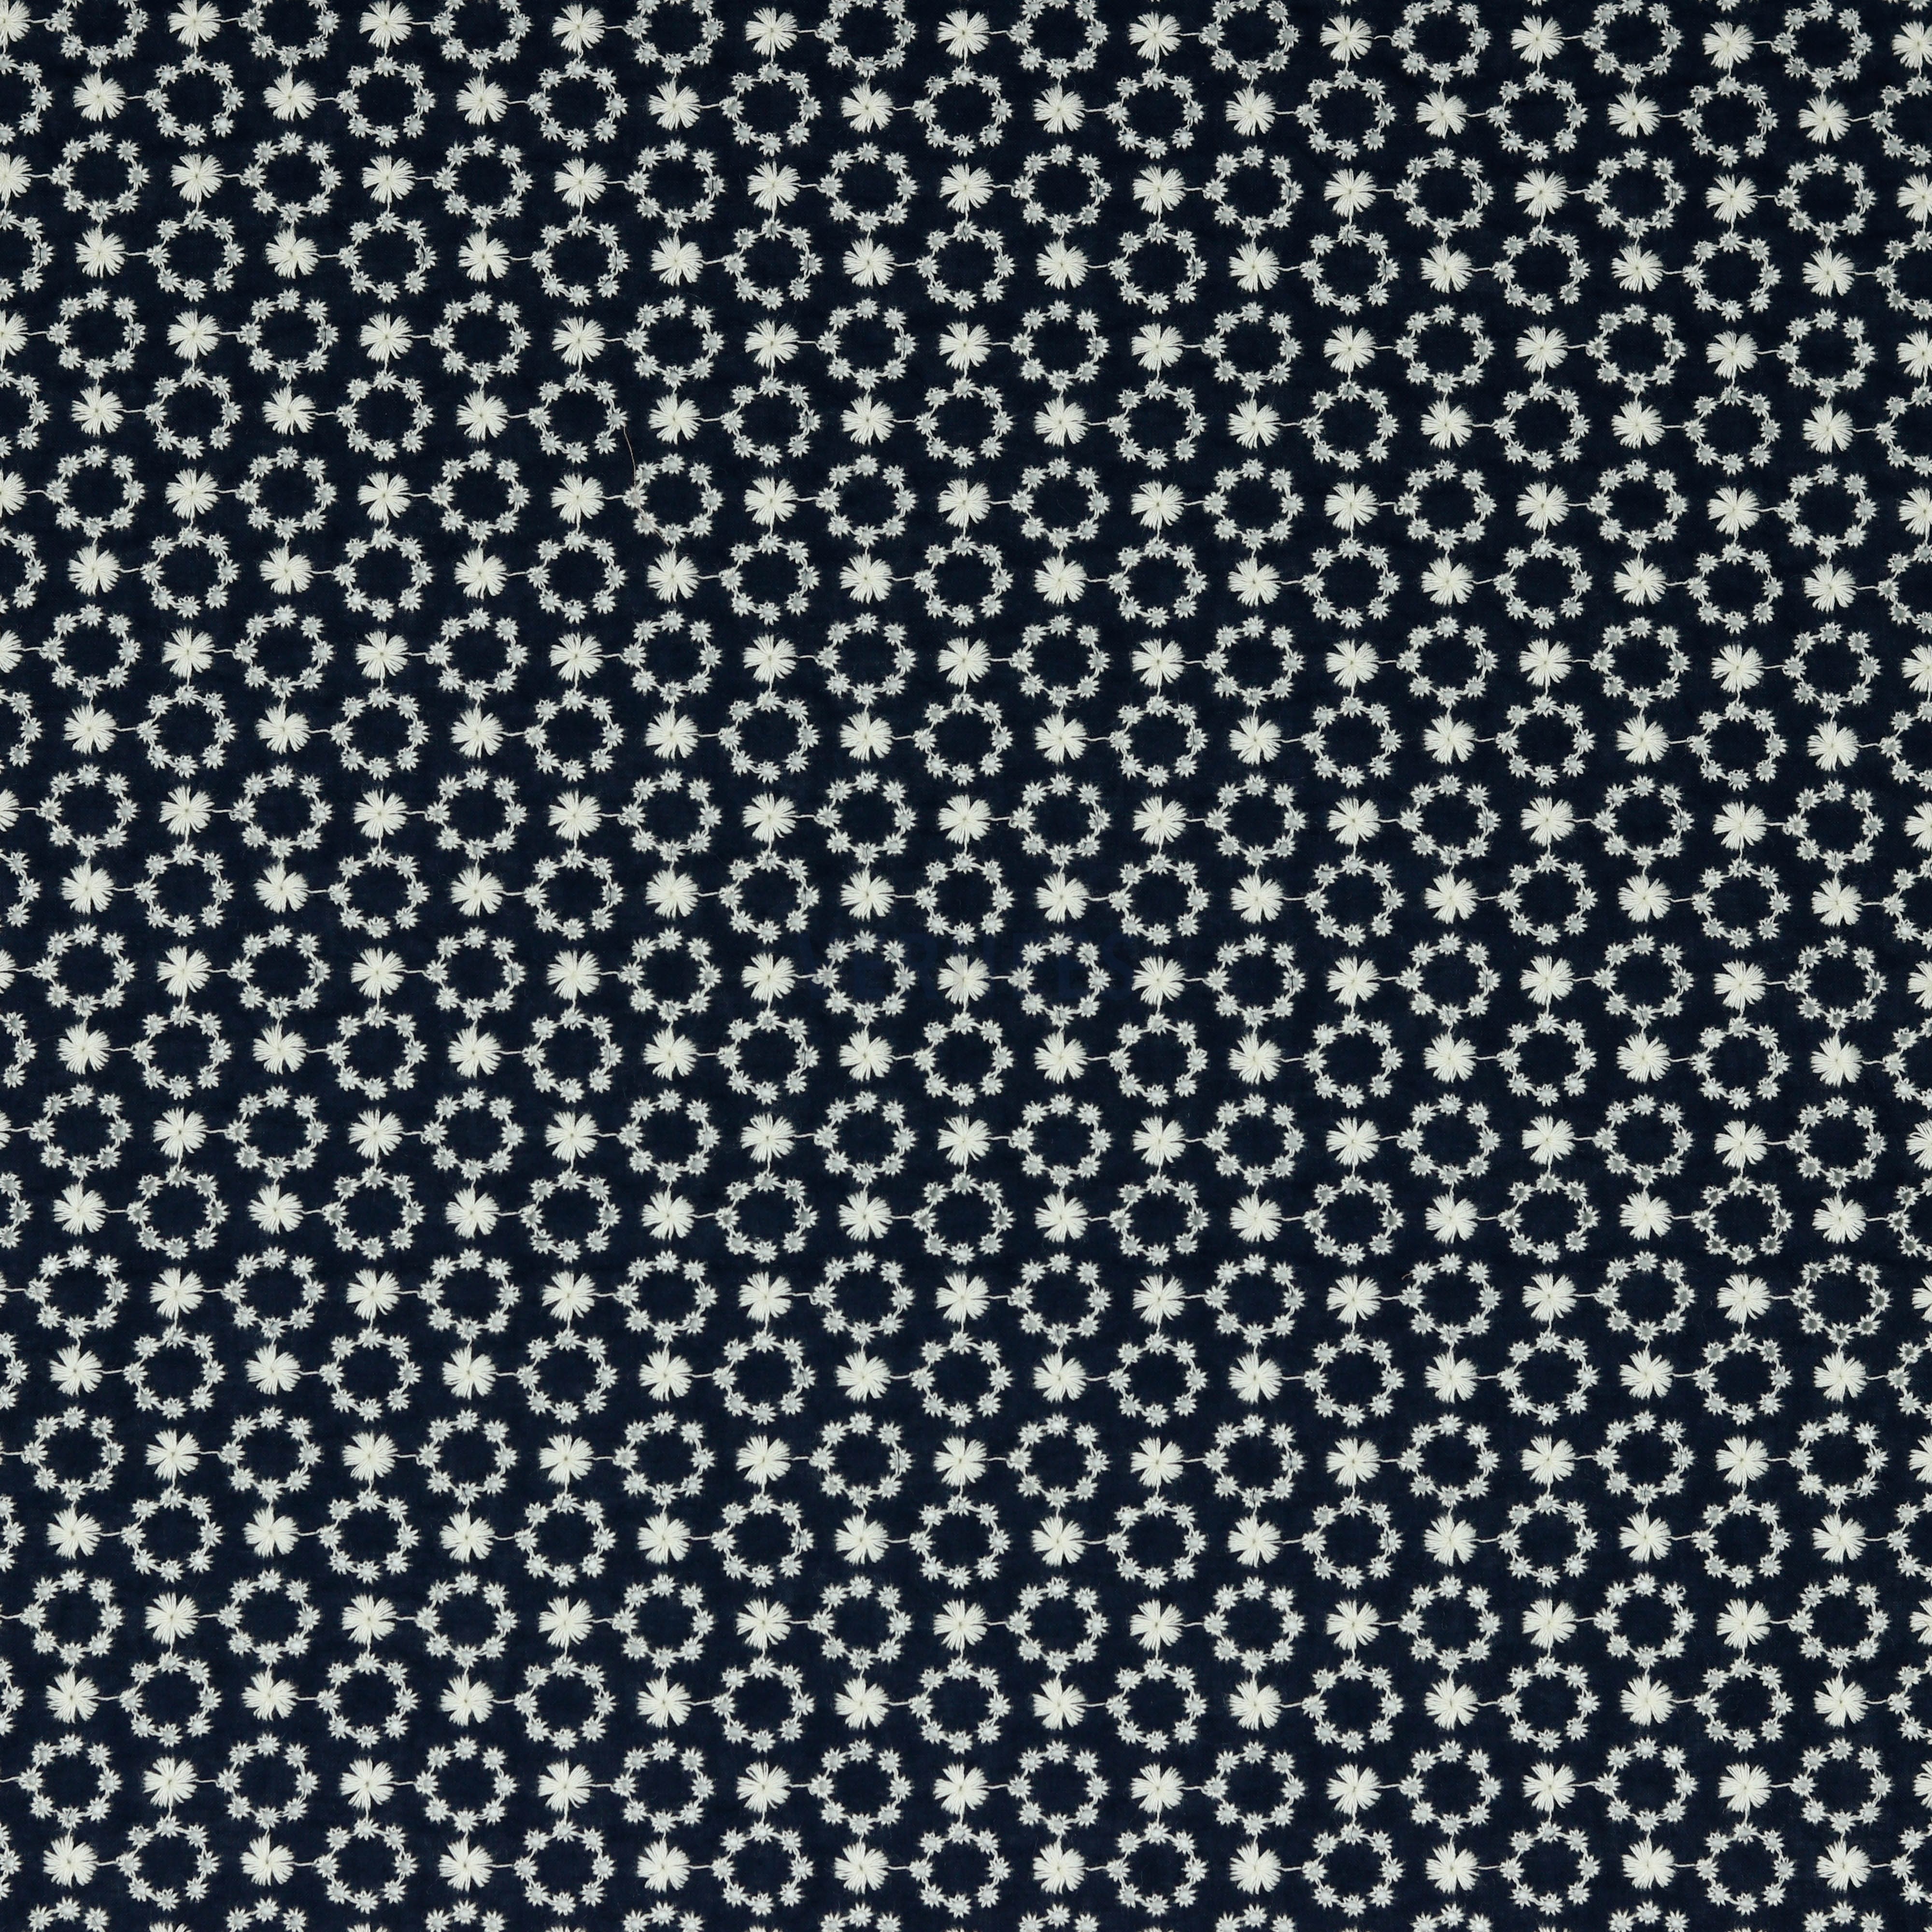 COTTON EMBROIDERY NAVY (high resolution)